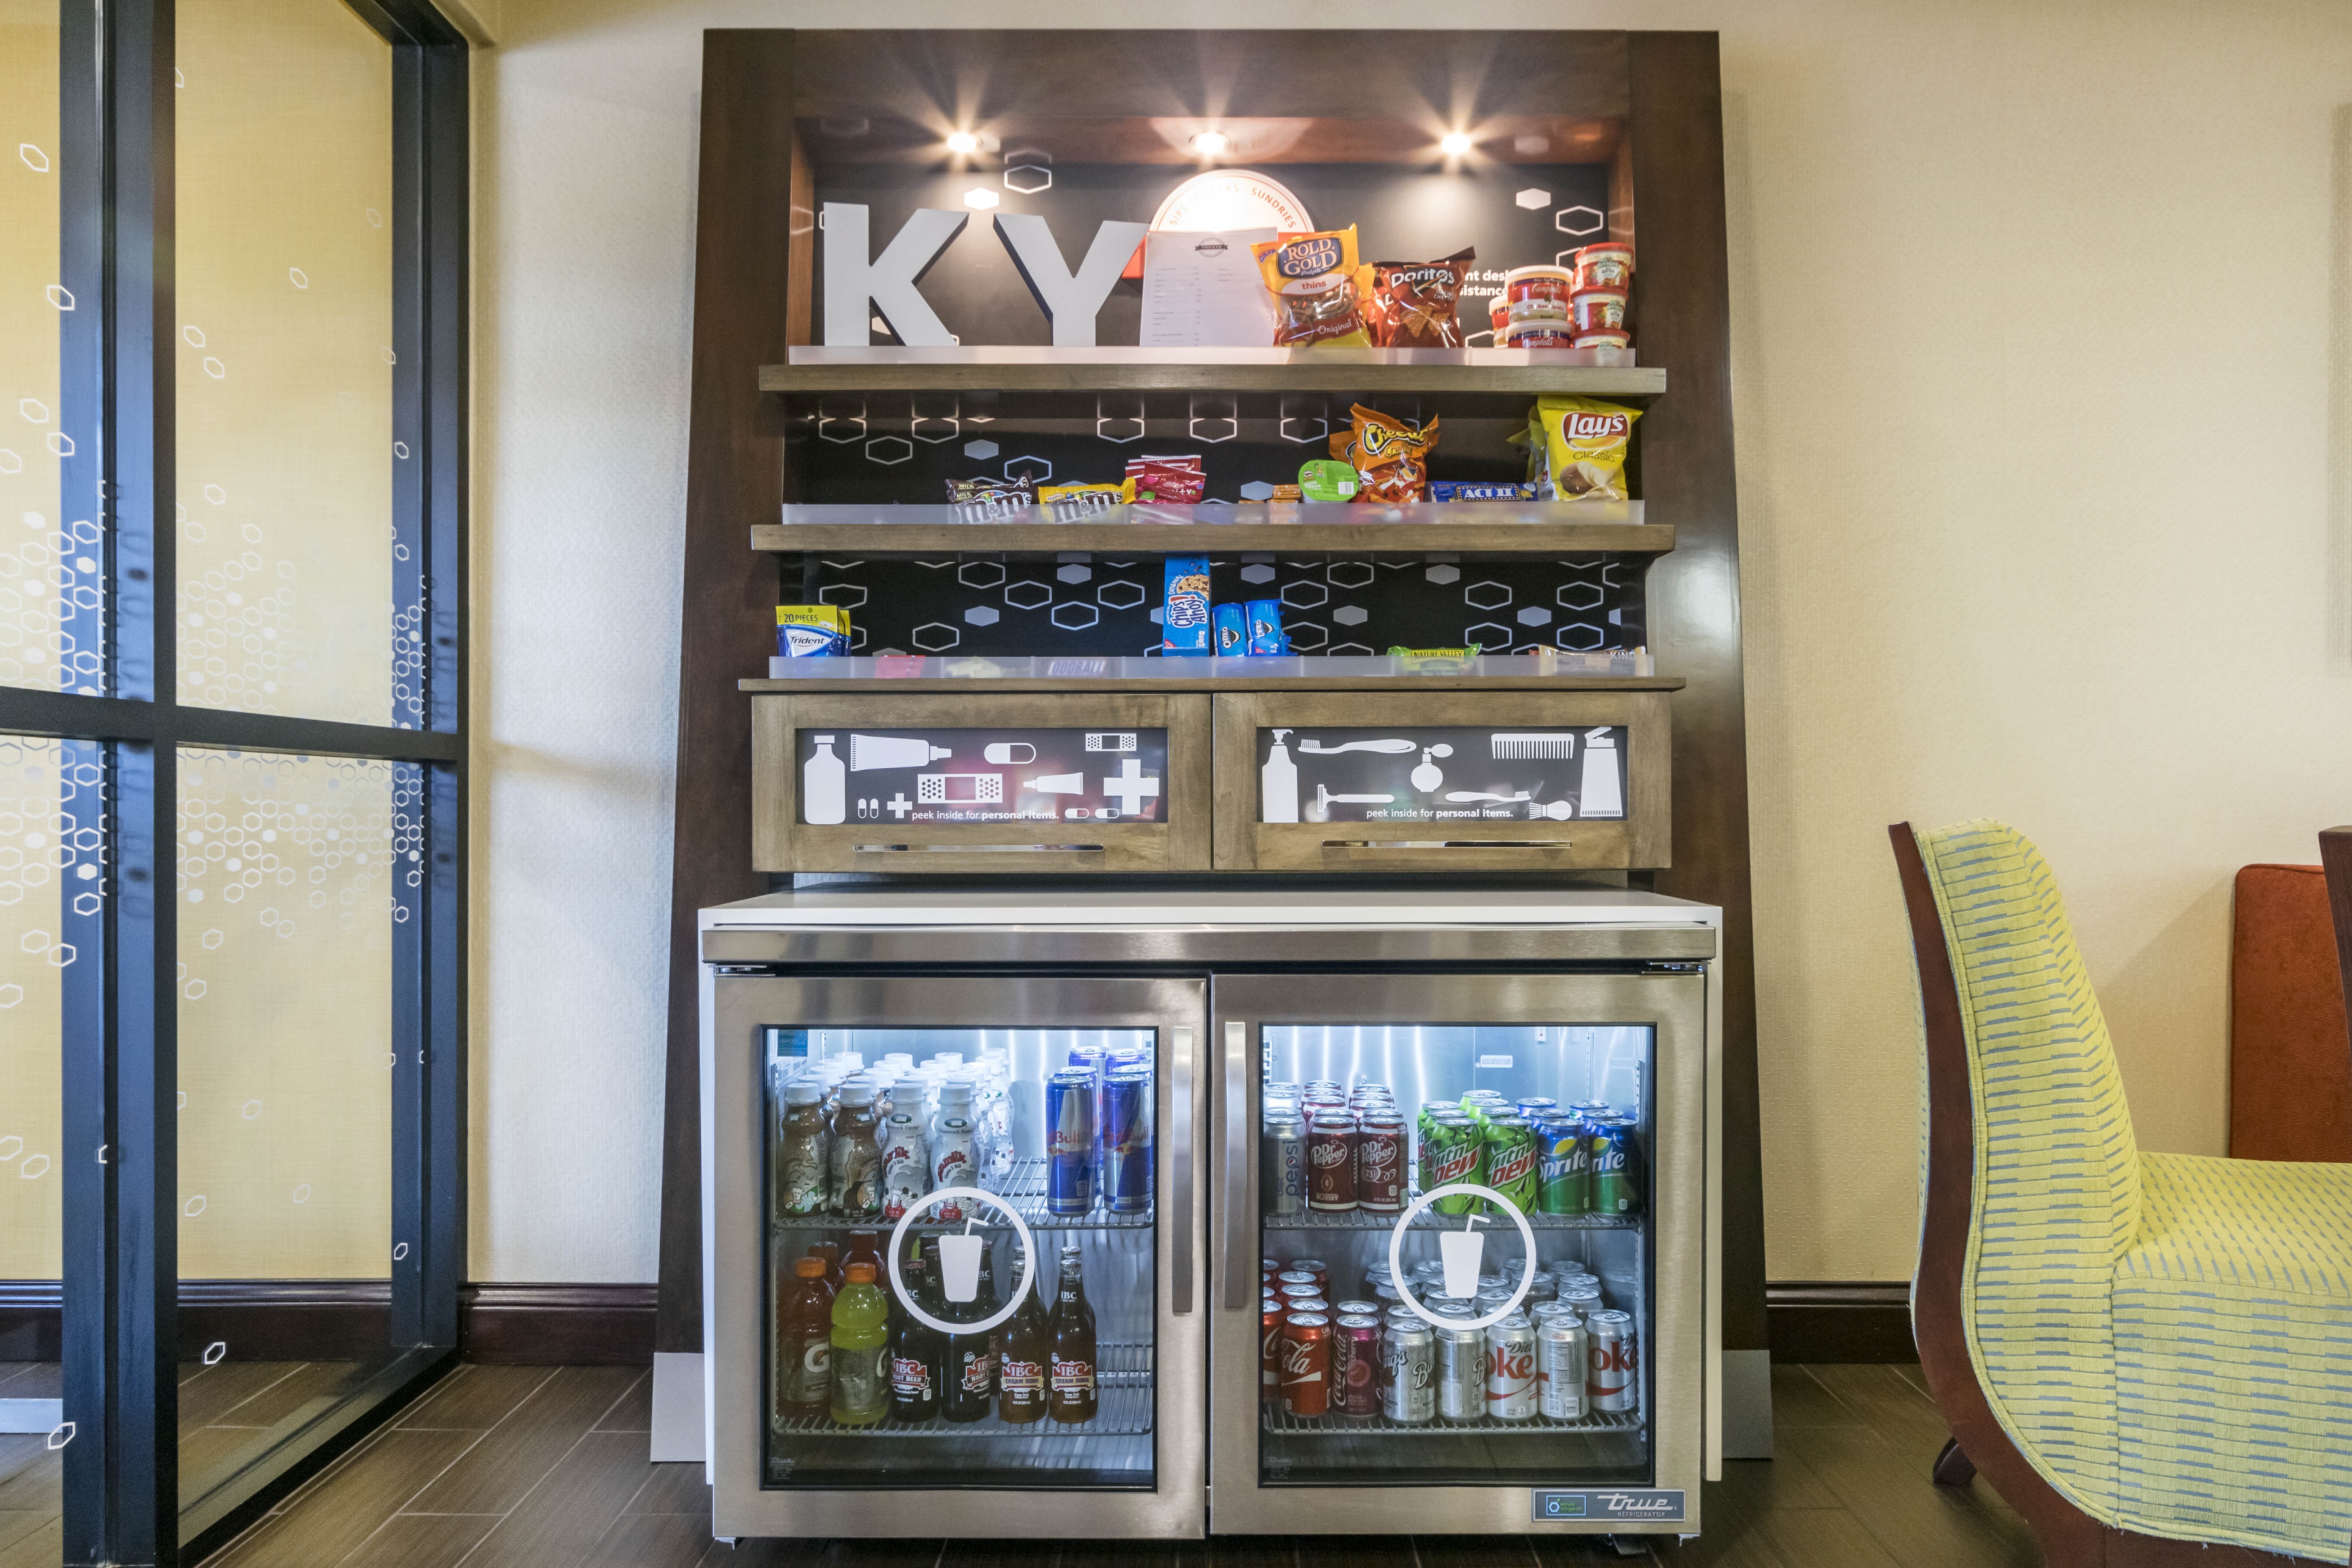 Walk-up Treat Shop with Snacks and Convenience Items in Lobby Area